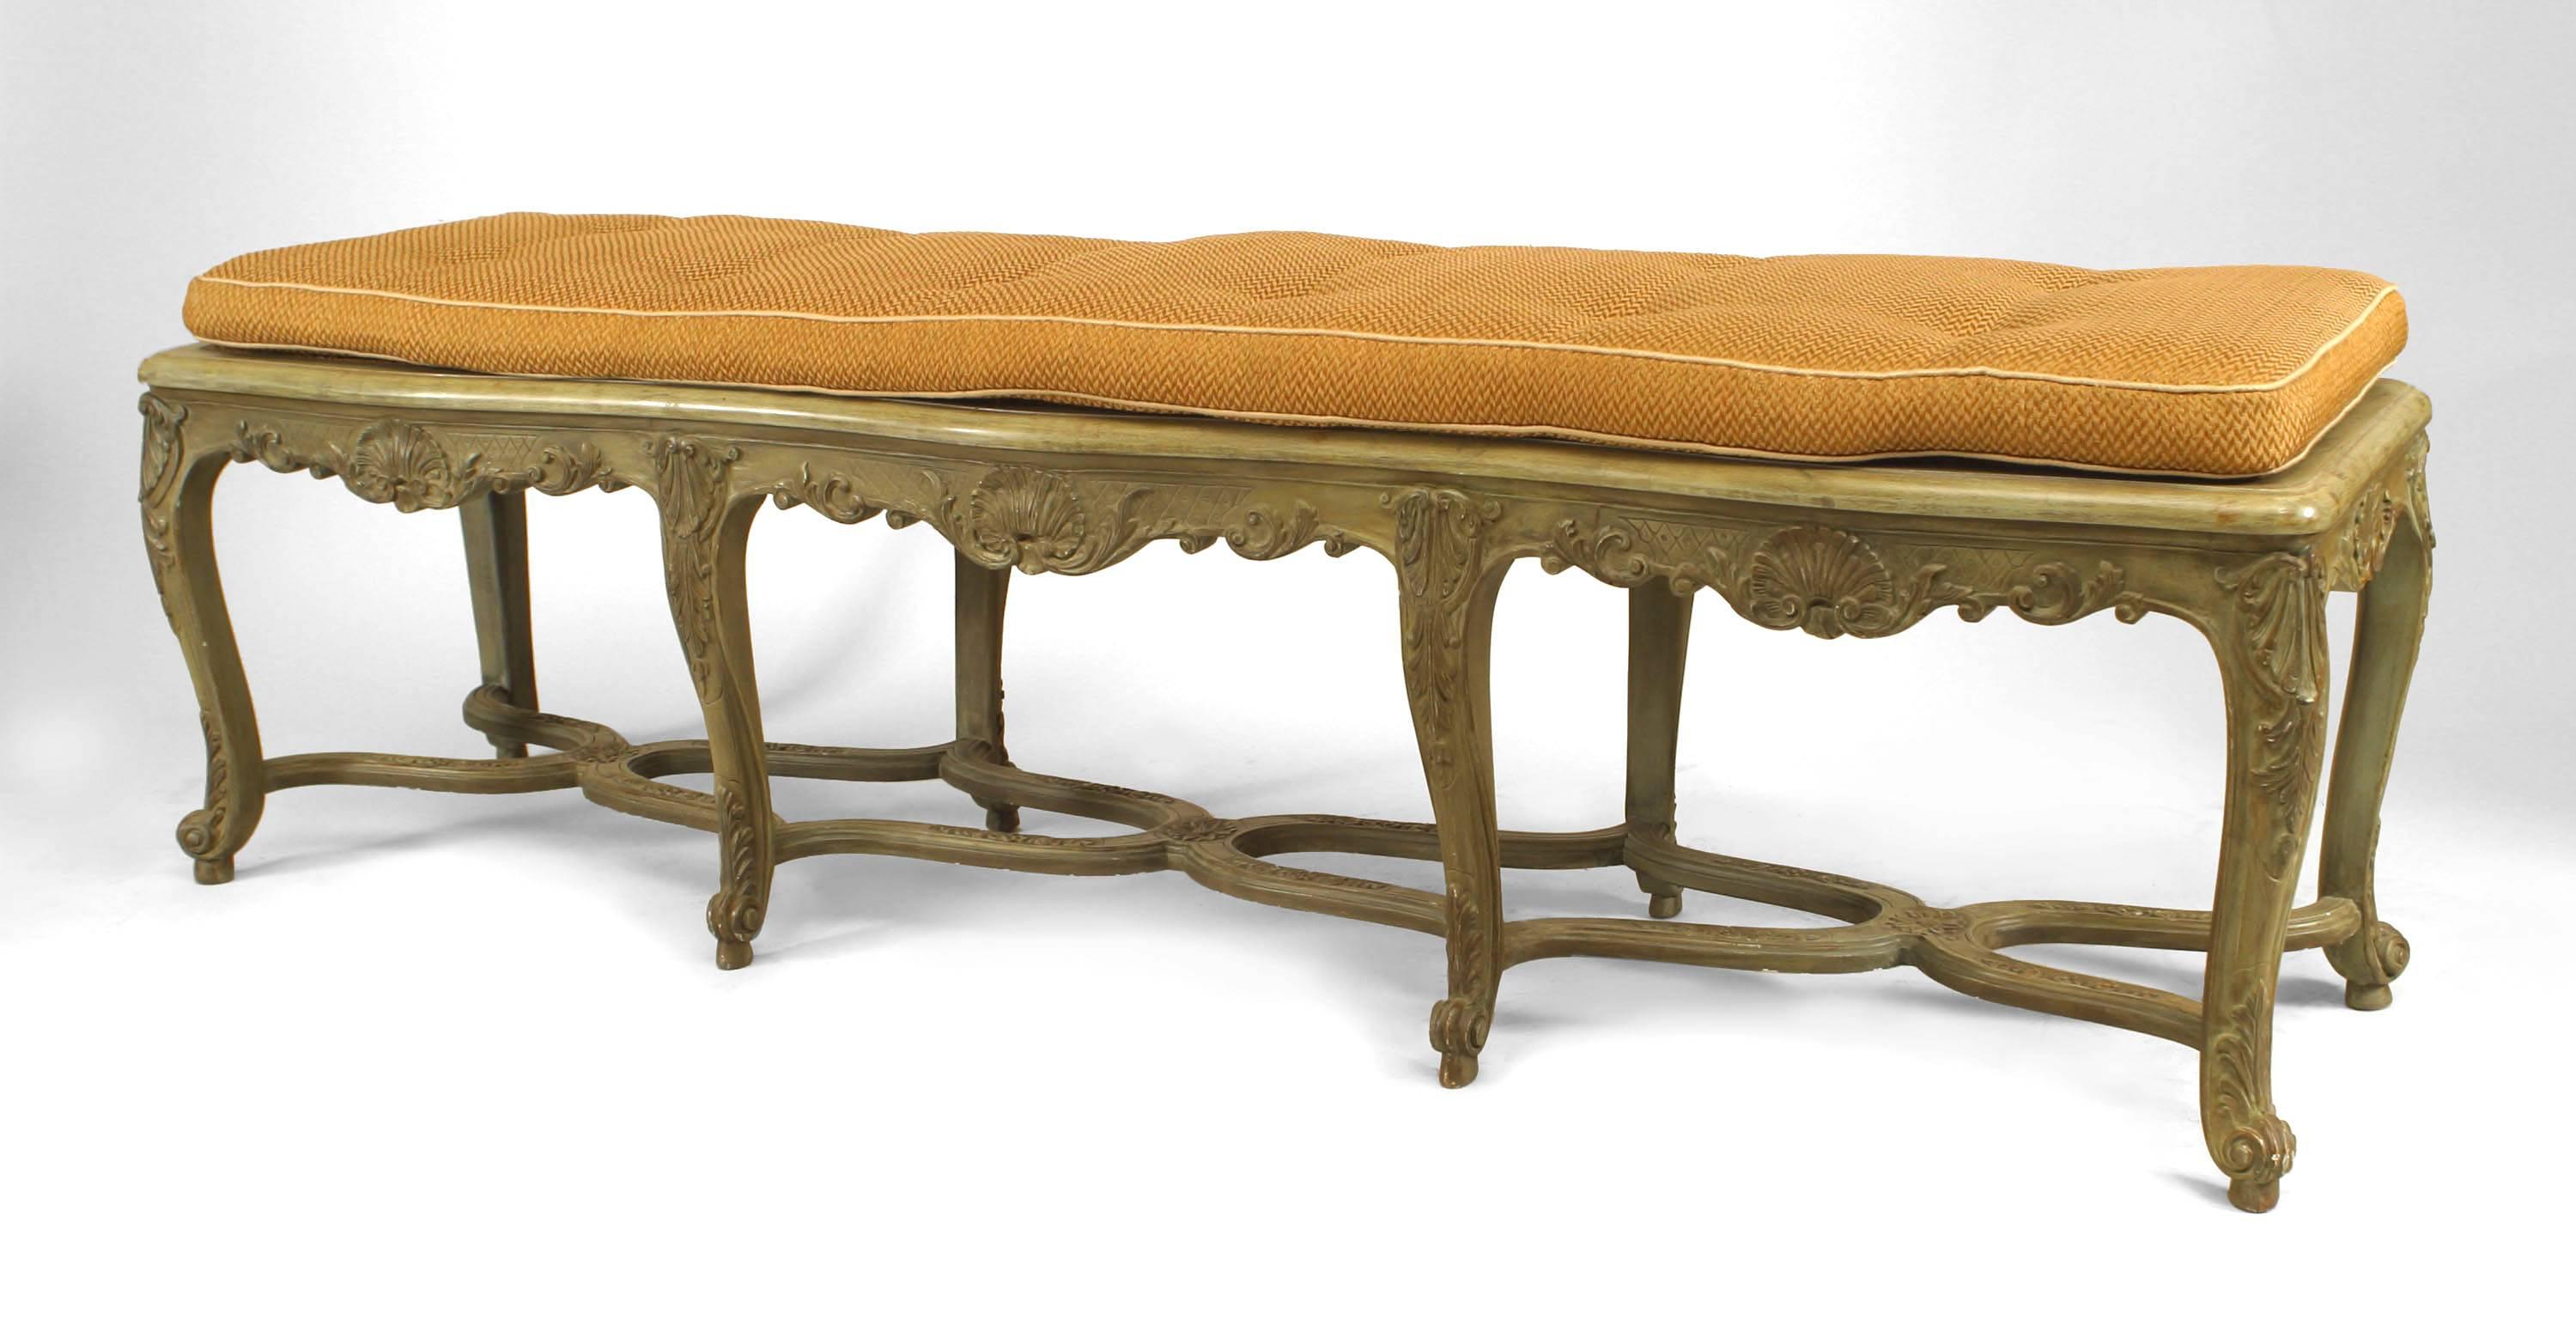 French Regence style (19/20th Century) green painted bench with floral carving and 8 legs connected with a stretcher and shaped cane seat under a cushion.
